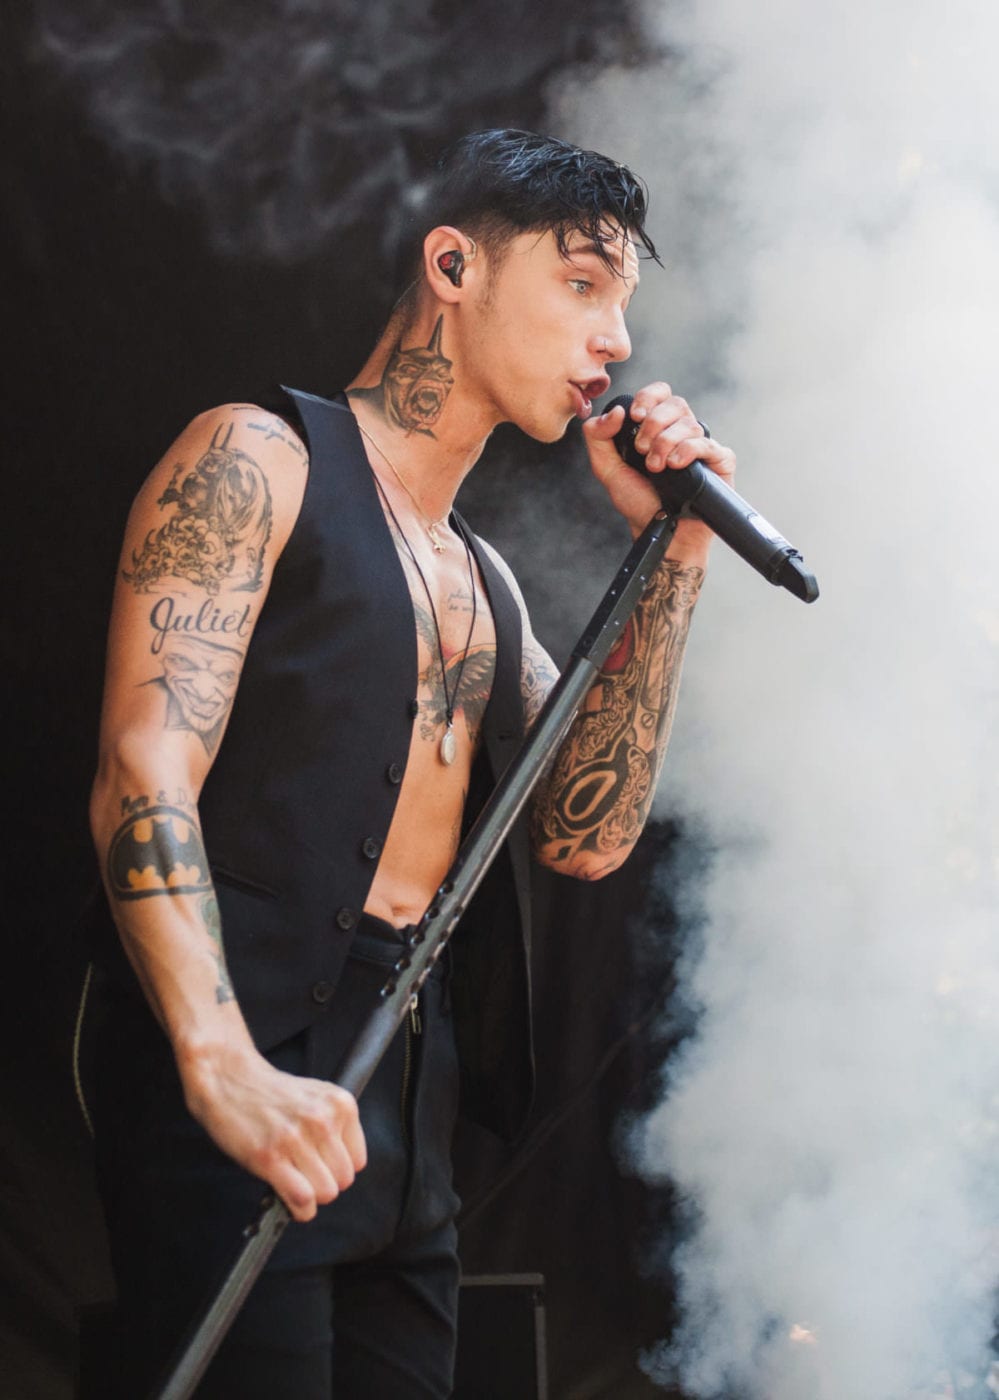 AND PHOTOS] WARPED TOUR, Columbia, MD July 16 HEAVY Magazine